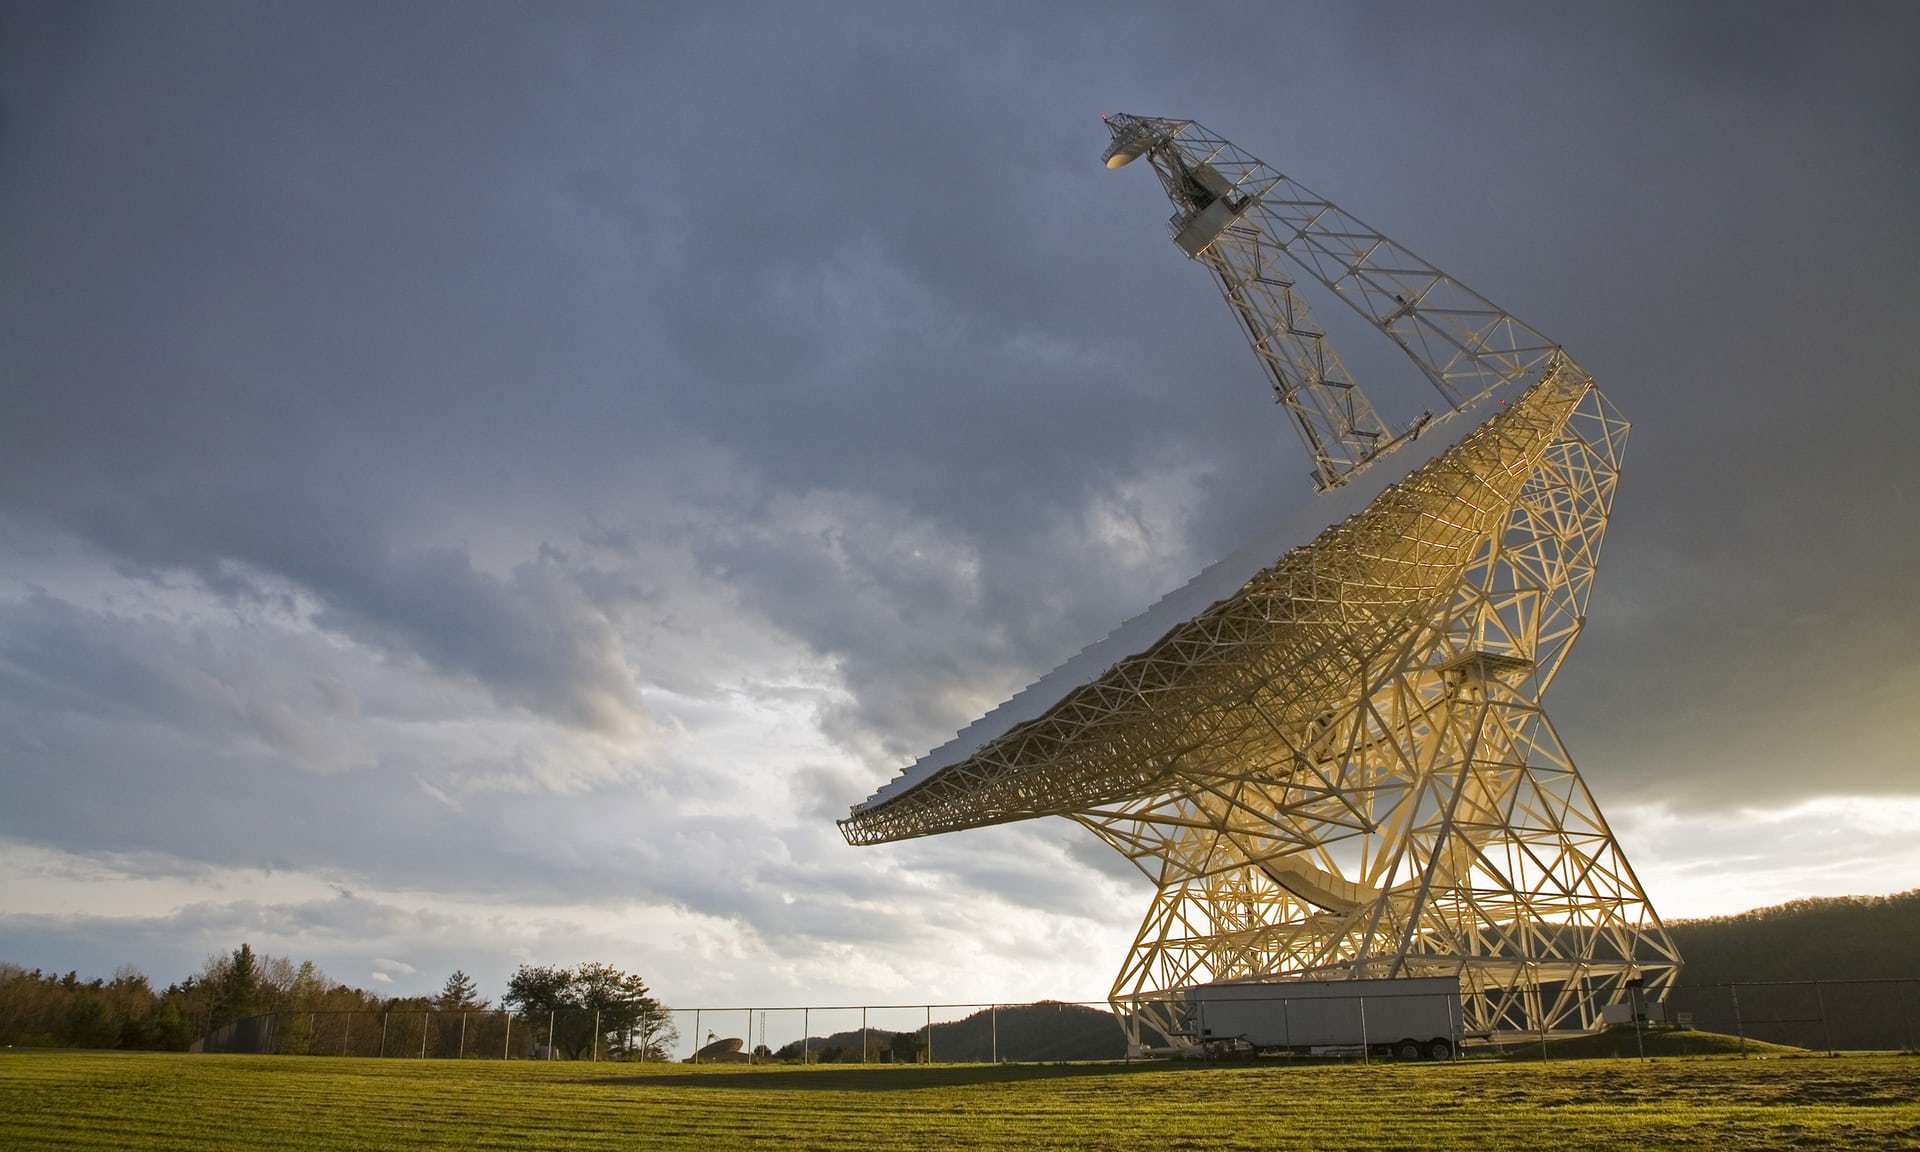 Searching the deep space: The Robert C Byrd Green Bank telescope at the National Radio Astronomy Observatory, part of the Listening Project, in Green Bank, West Virginia, US